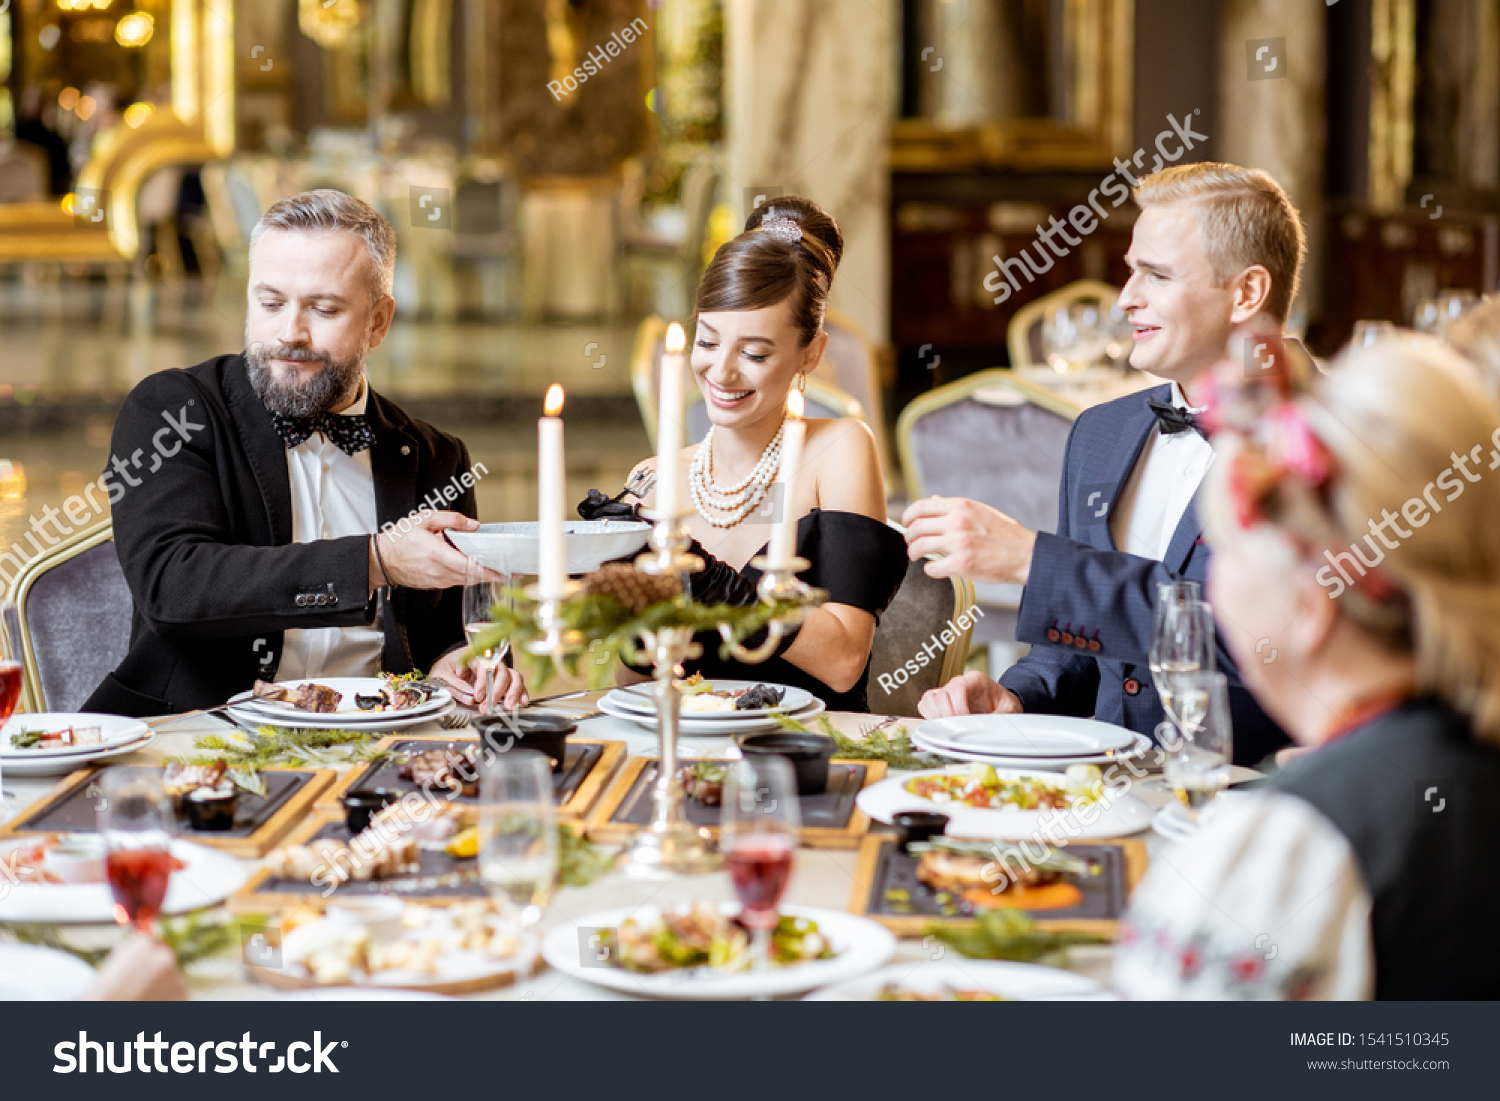 Elegantly dressed group of people having a festive dinner at a well-served table with tasty dishes during New Year Eve at the luxury restaurant #1541510345